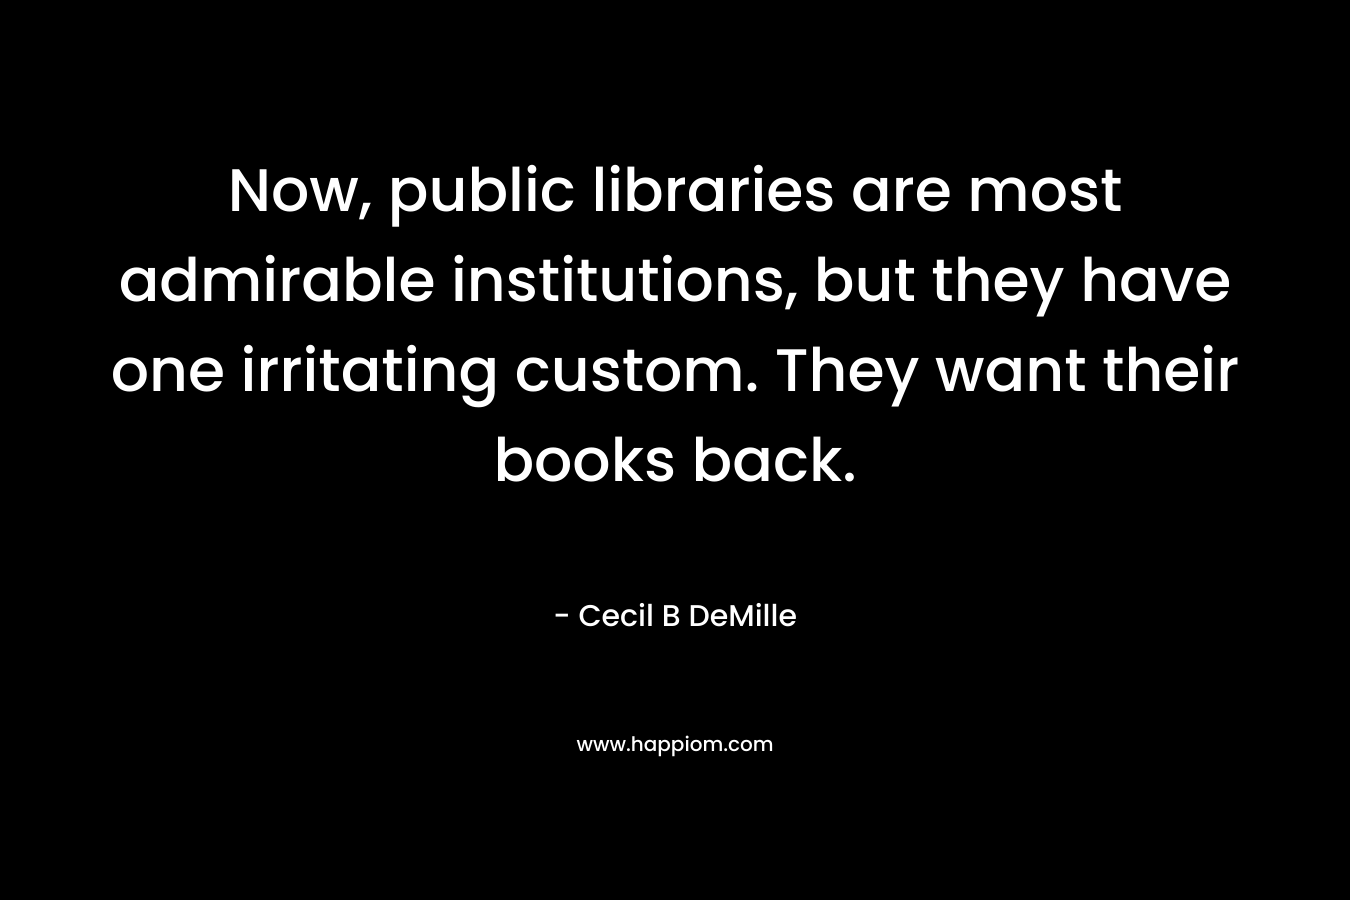 Now, public libraries are most admirable institutions, but they have one irritating custom. They want their books back. – Cecil B DeMille